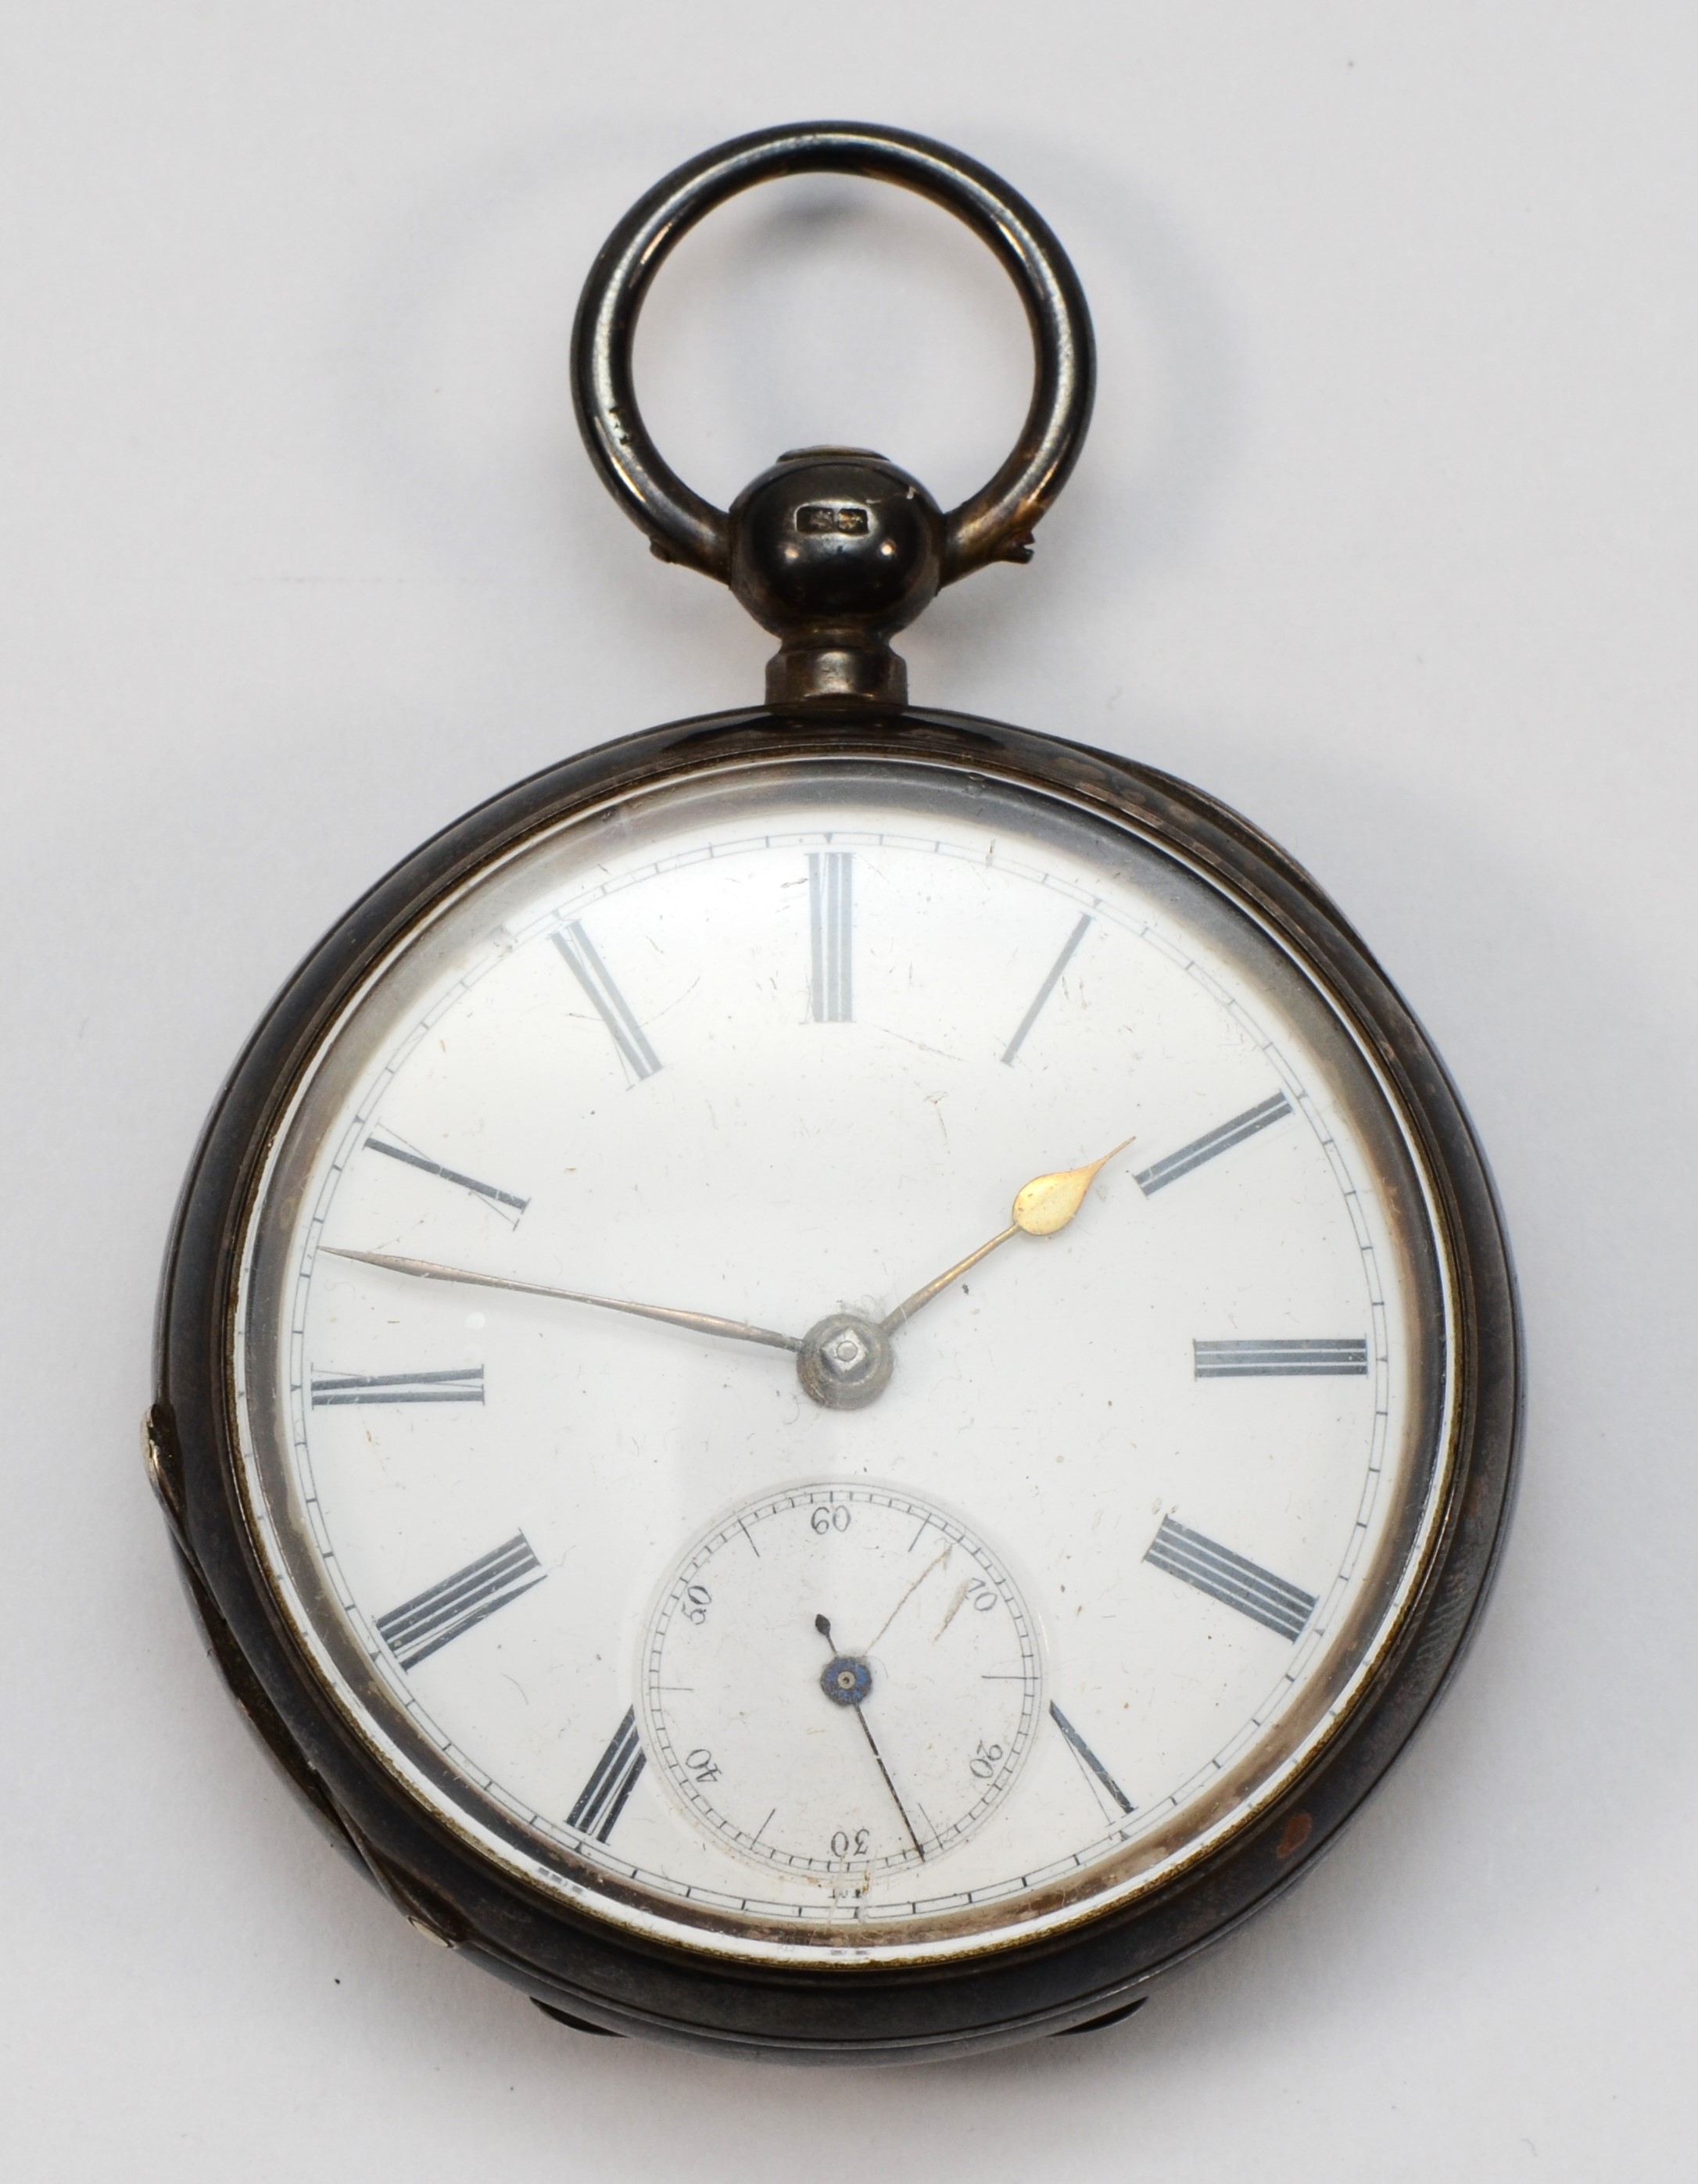 Dominion Watch Co., a silver open face key wind pocket watch, Birmingham 1884, signed and numbered